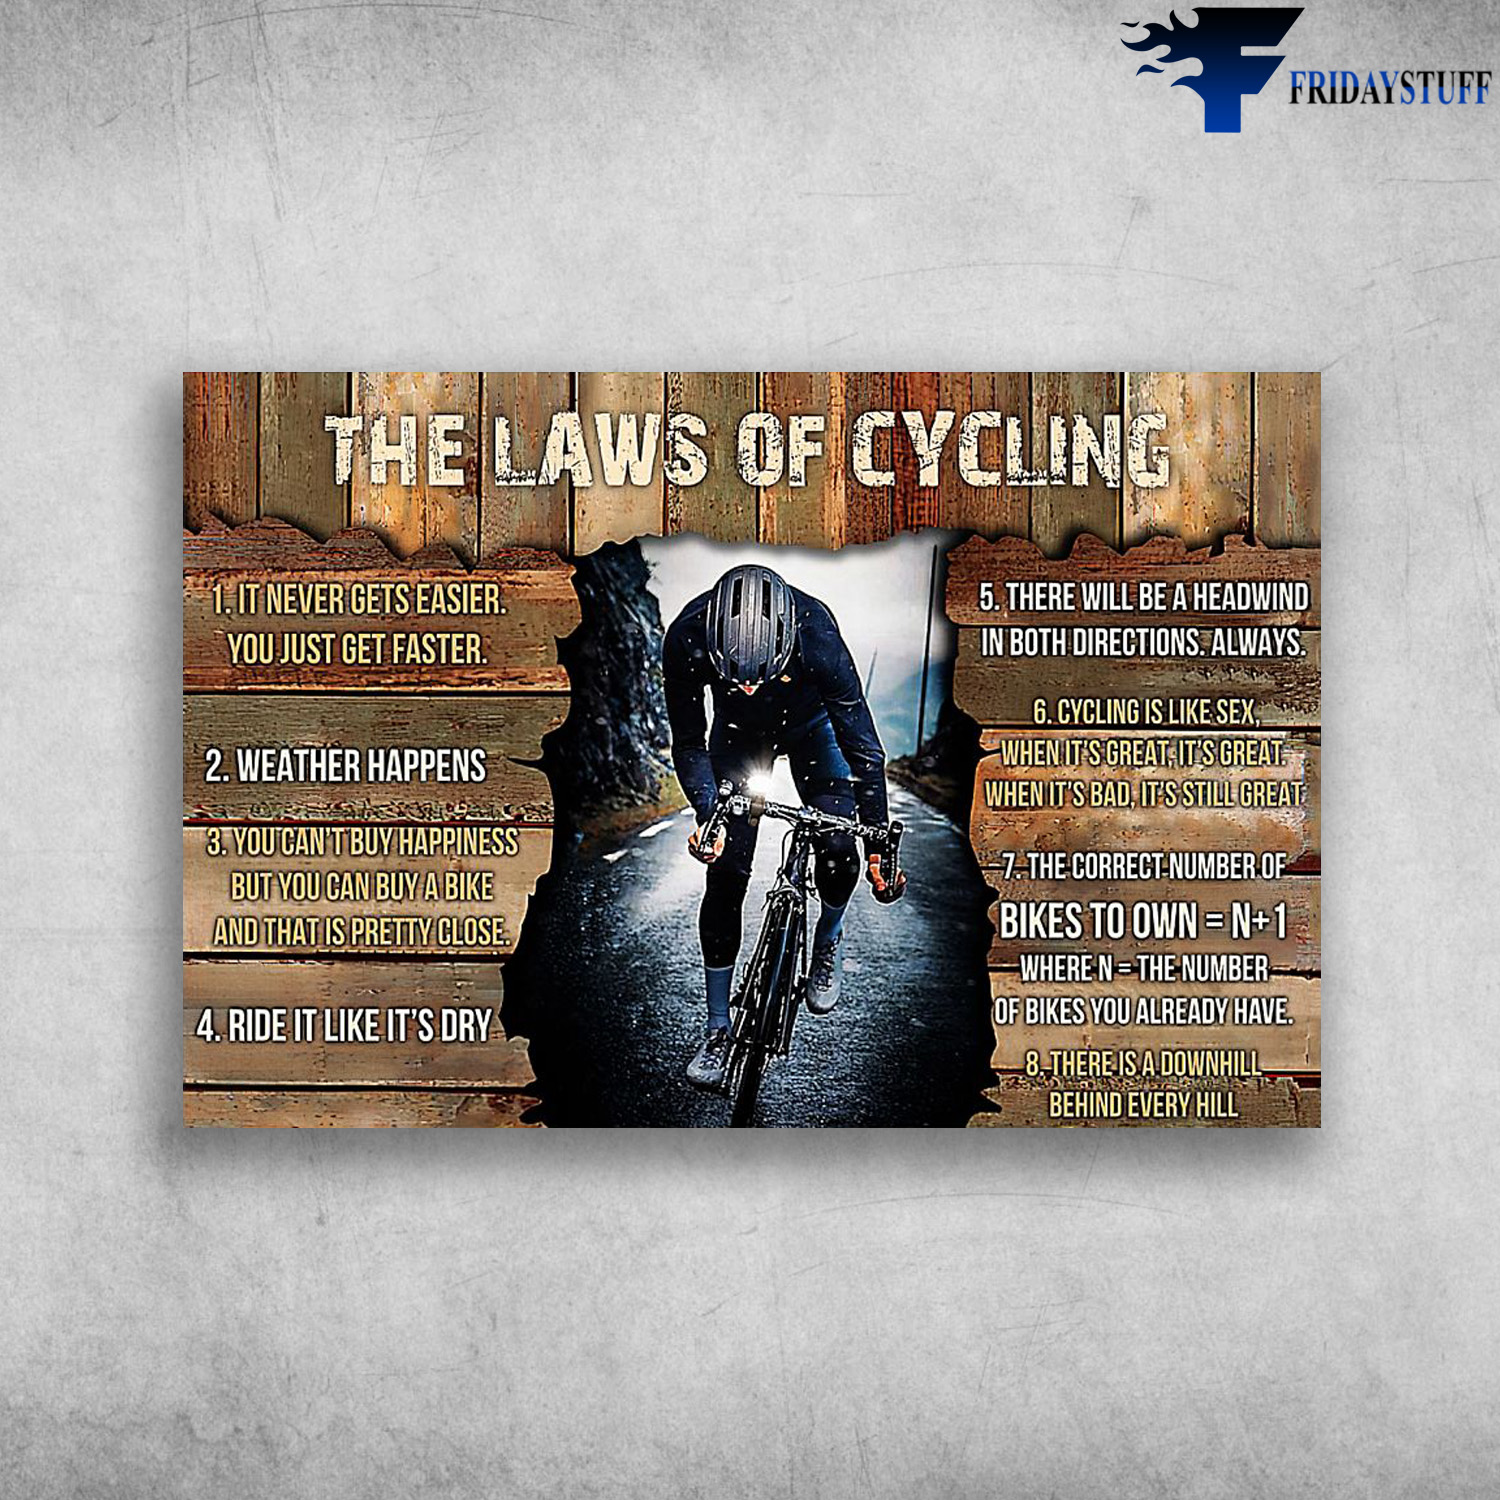 Man Cycling - The Laws Of Cycling, It Never Gets Easier, You Just Get Faster, Weather Happiness, You Can't Buy Happiness But You Can Buy A Bike, And That Is Pretty Close, Ride It Like It's Dry